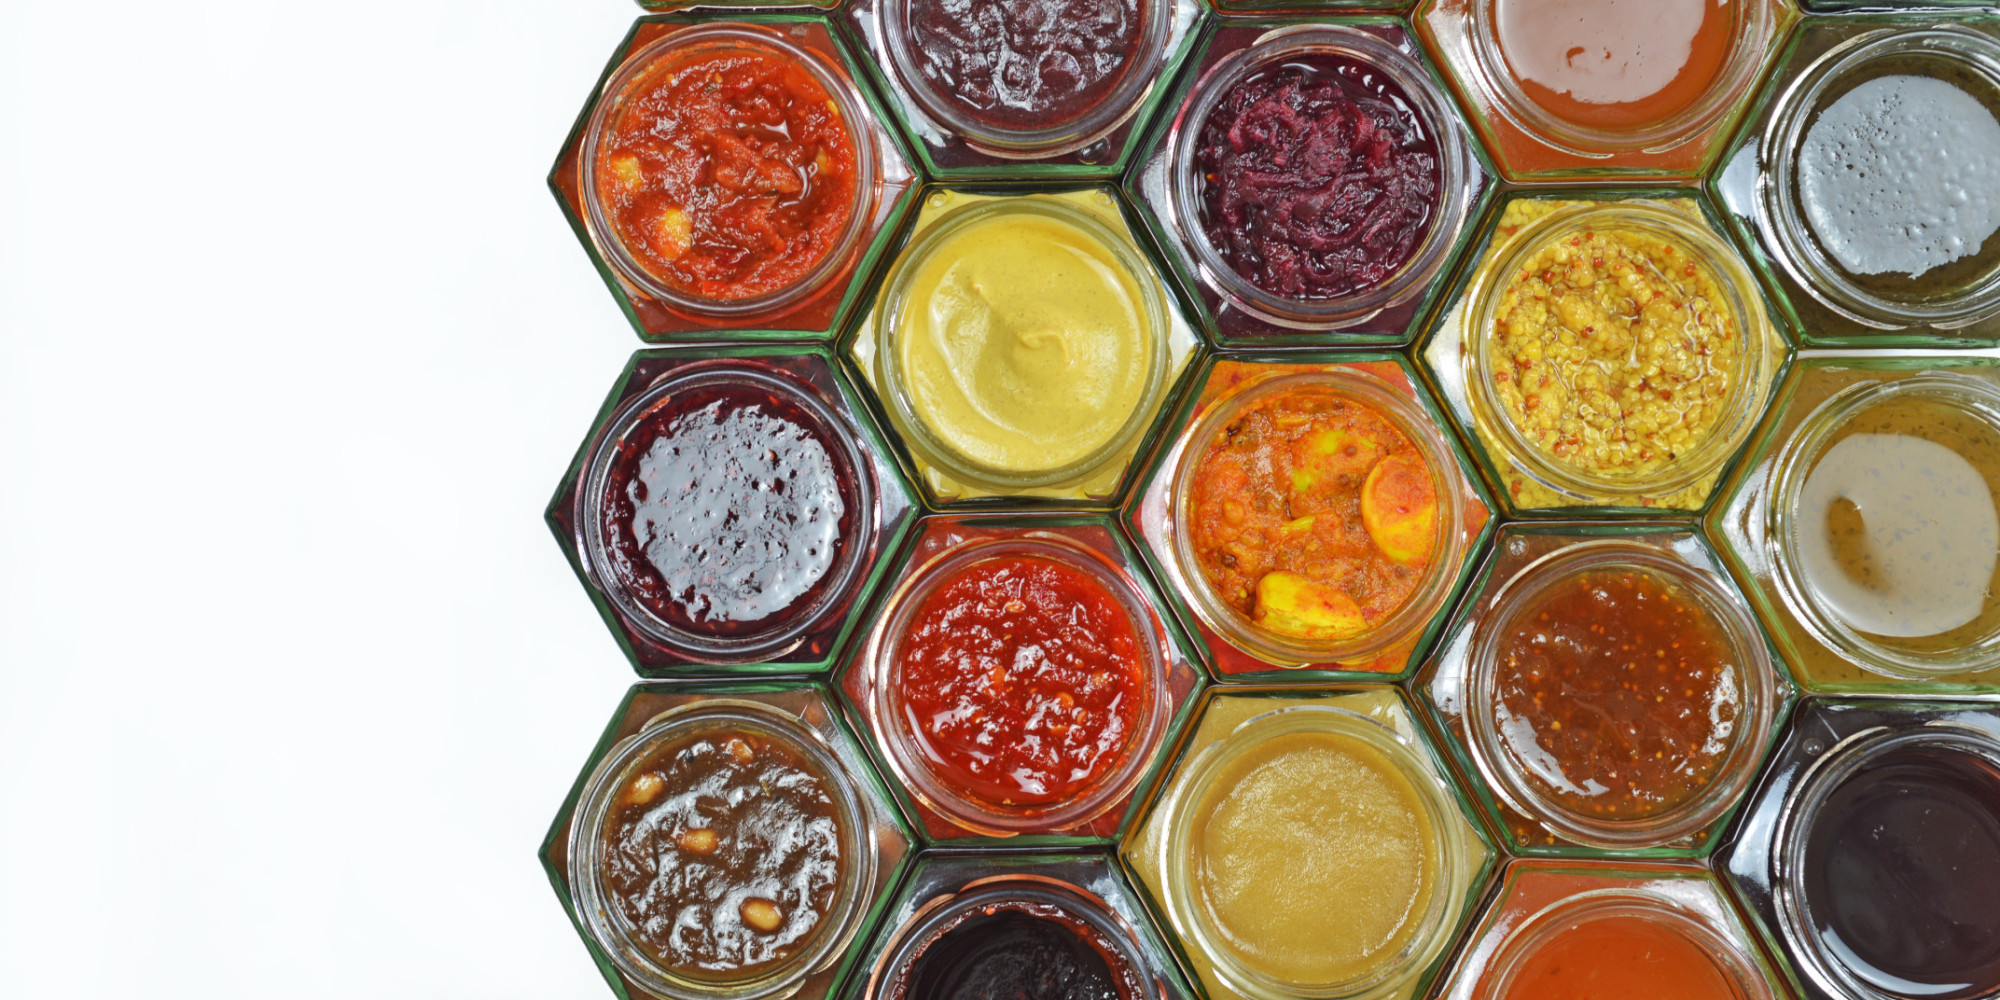 List Of Sauces And Condiments
 The Best List Sauces and Condiments Best Round Up